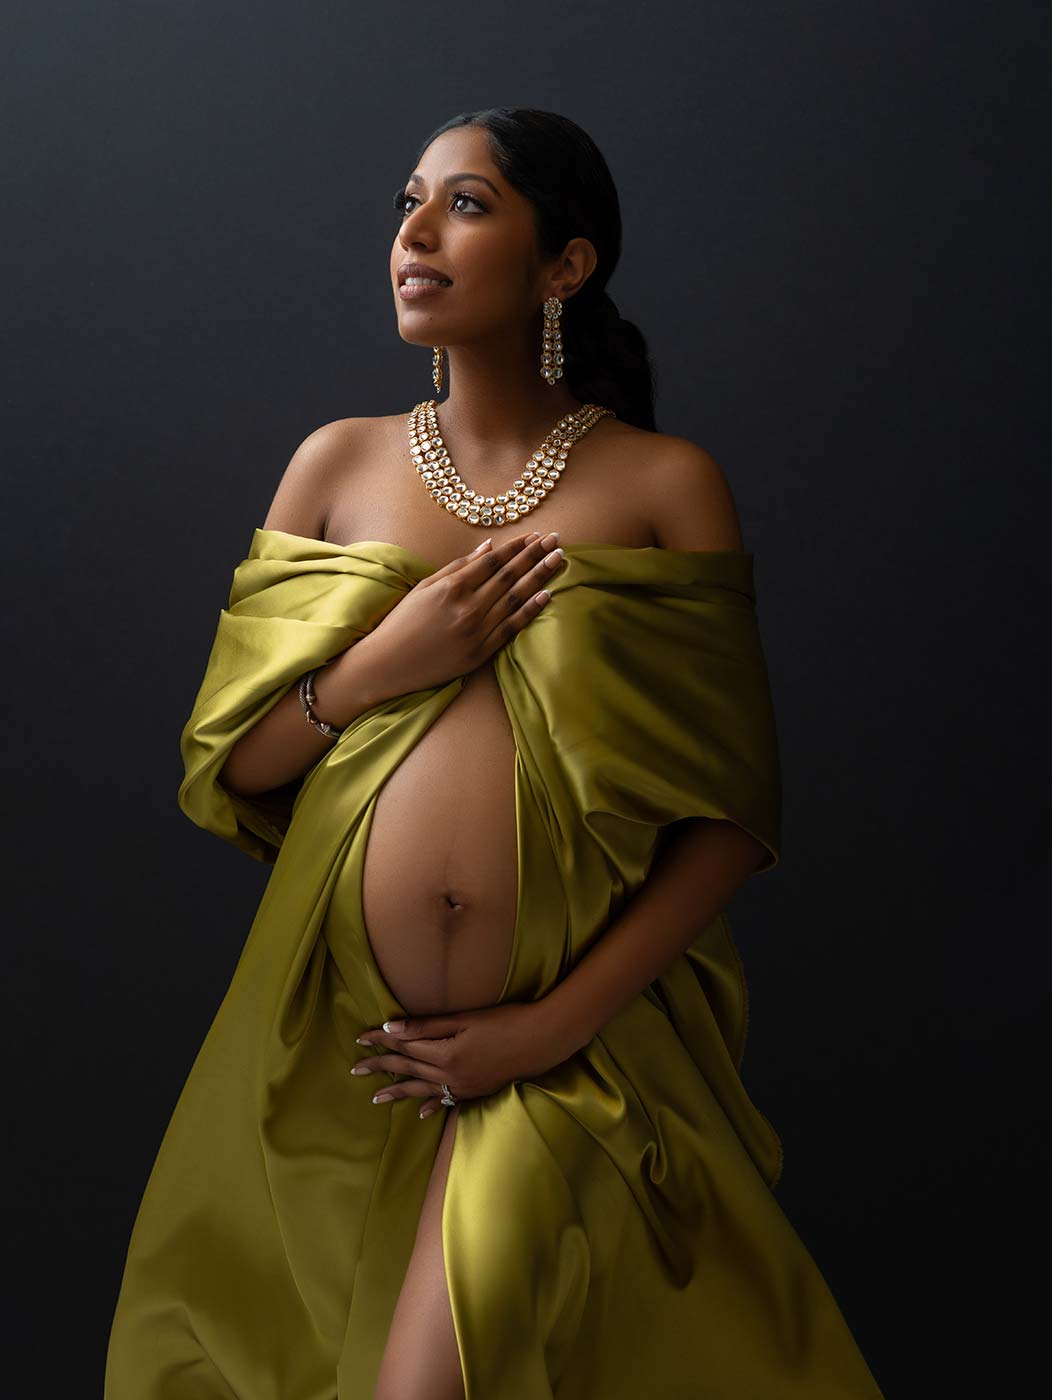 Beautiful lime silk fabric worn by a pregnant woman in NYC